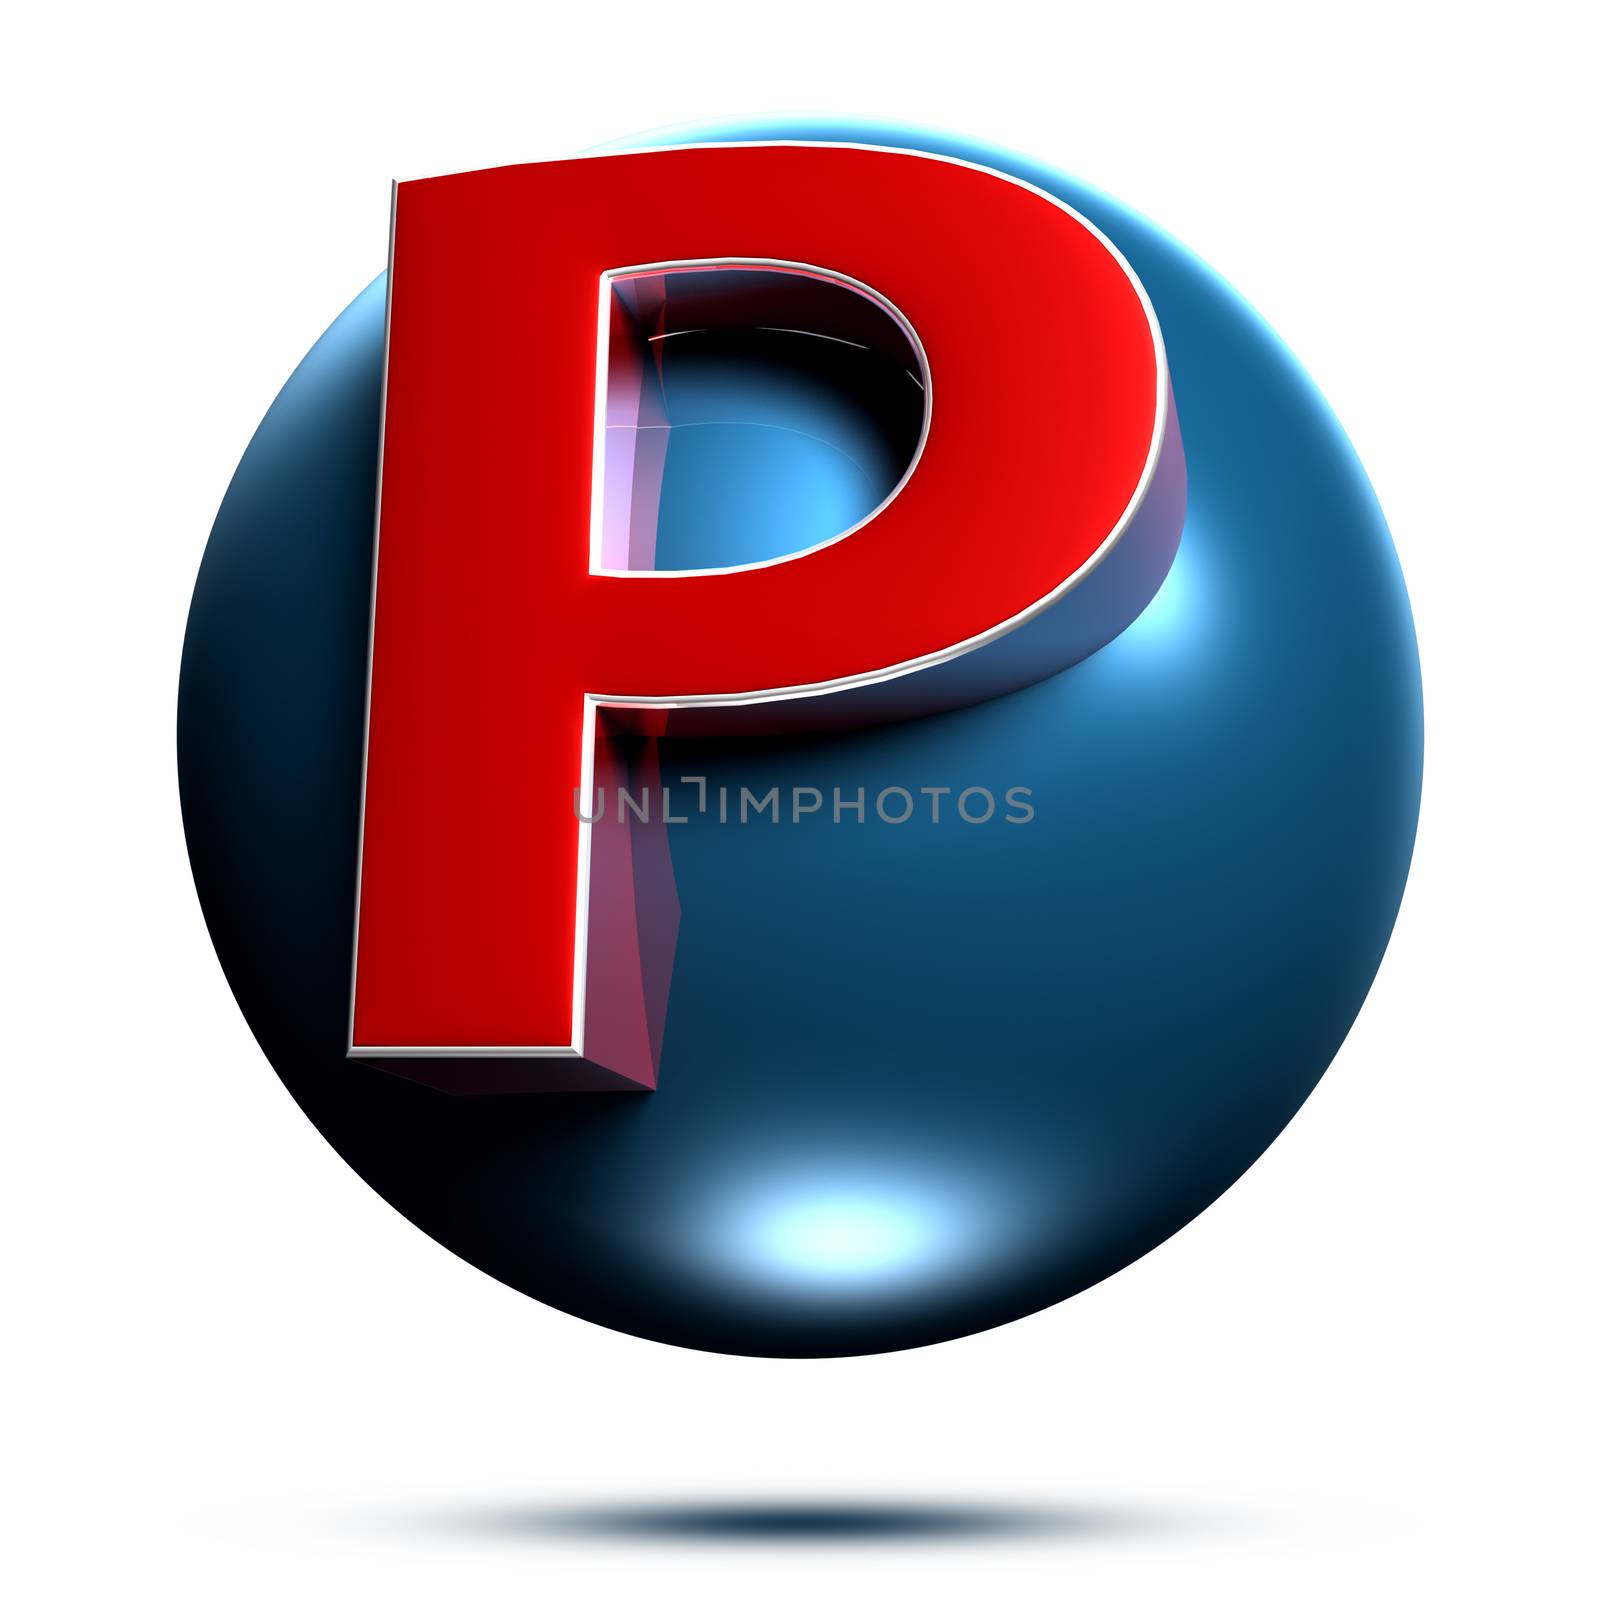 P logo isolated on white background illustration 3D rendering with clipping path.